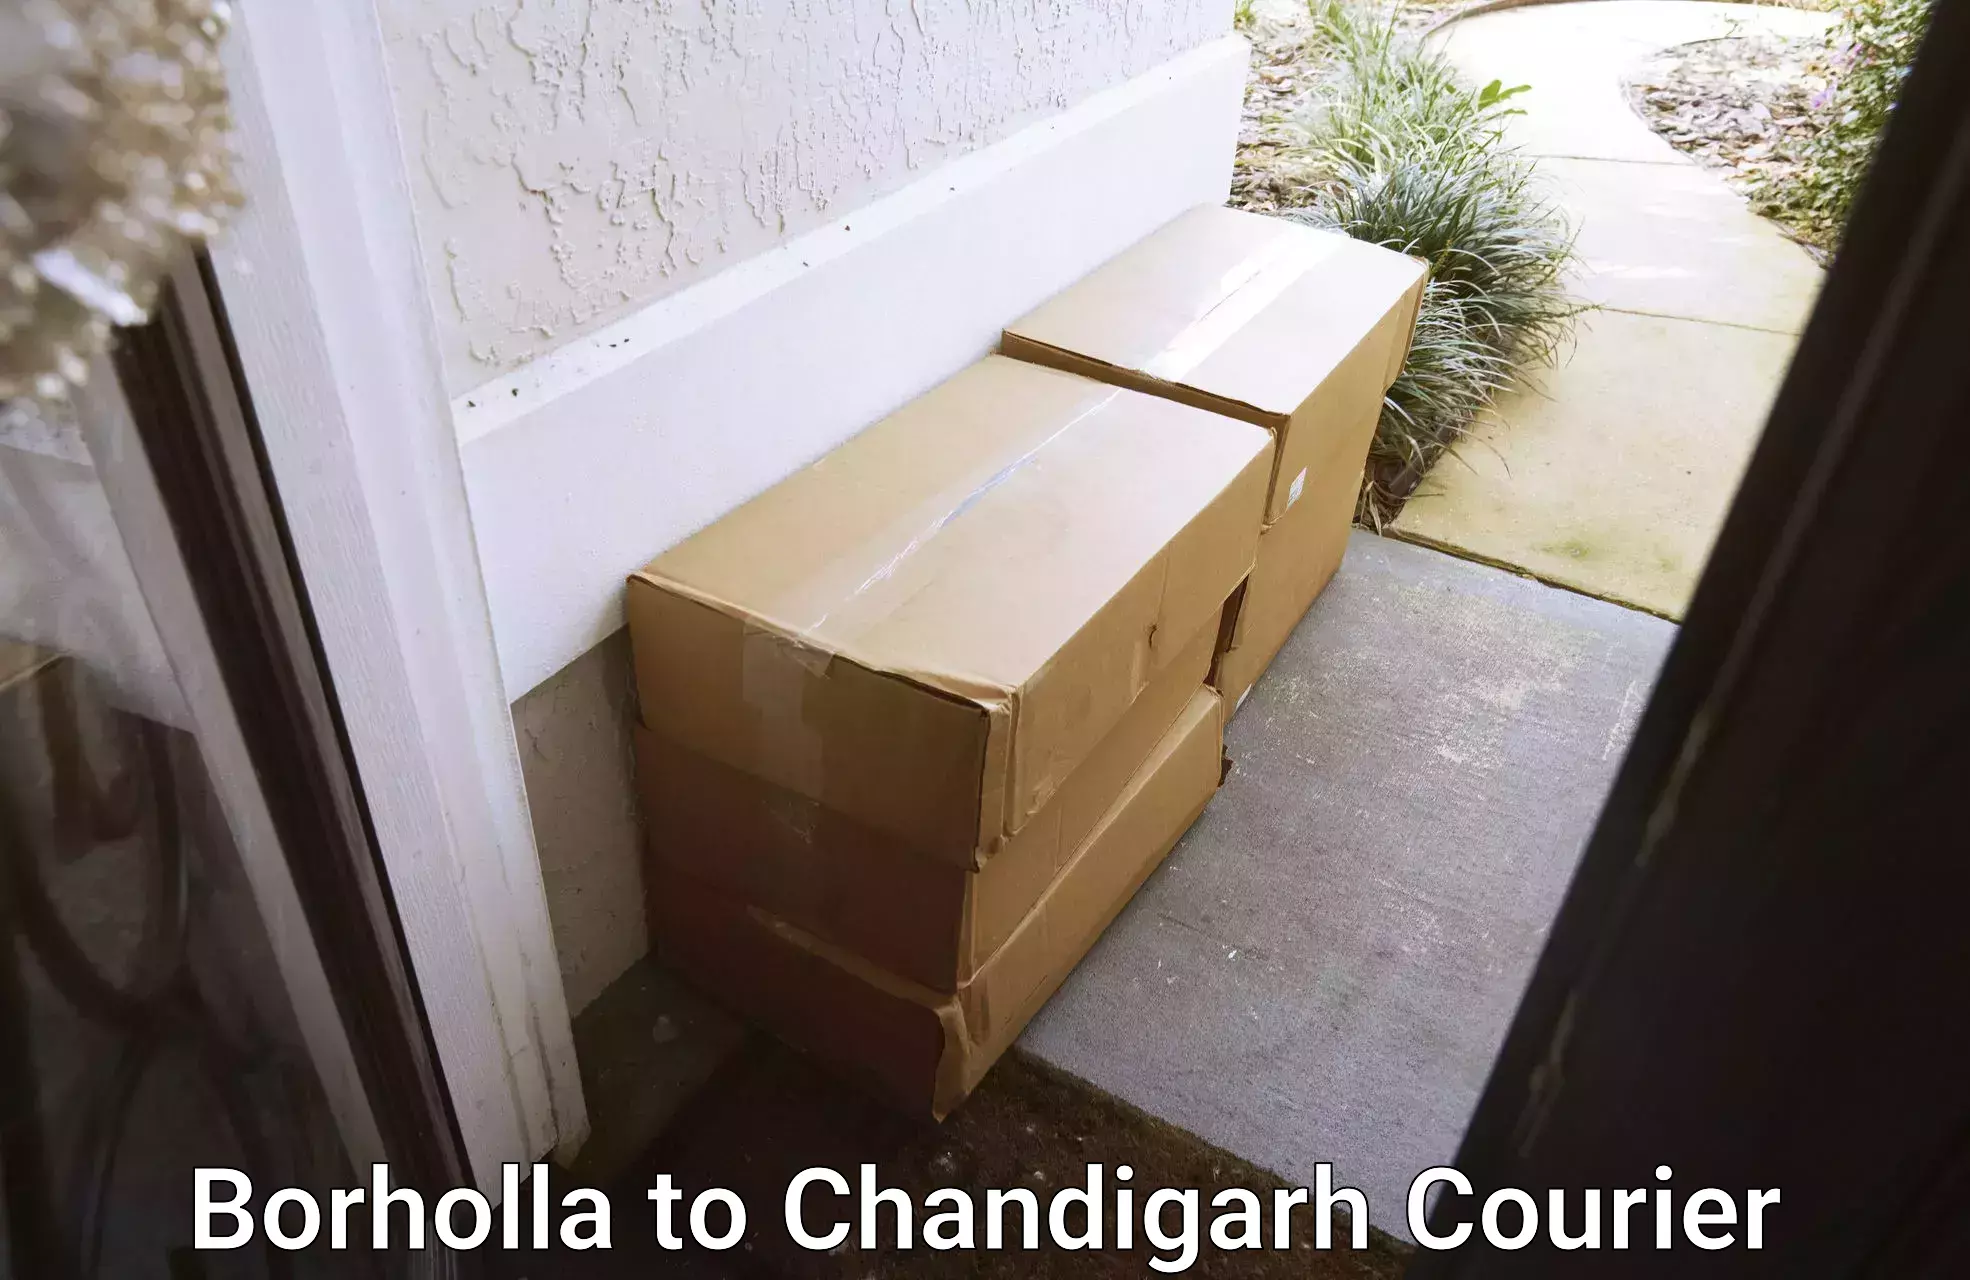 Cargo courier service Borholla to Chandigarh